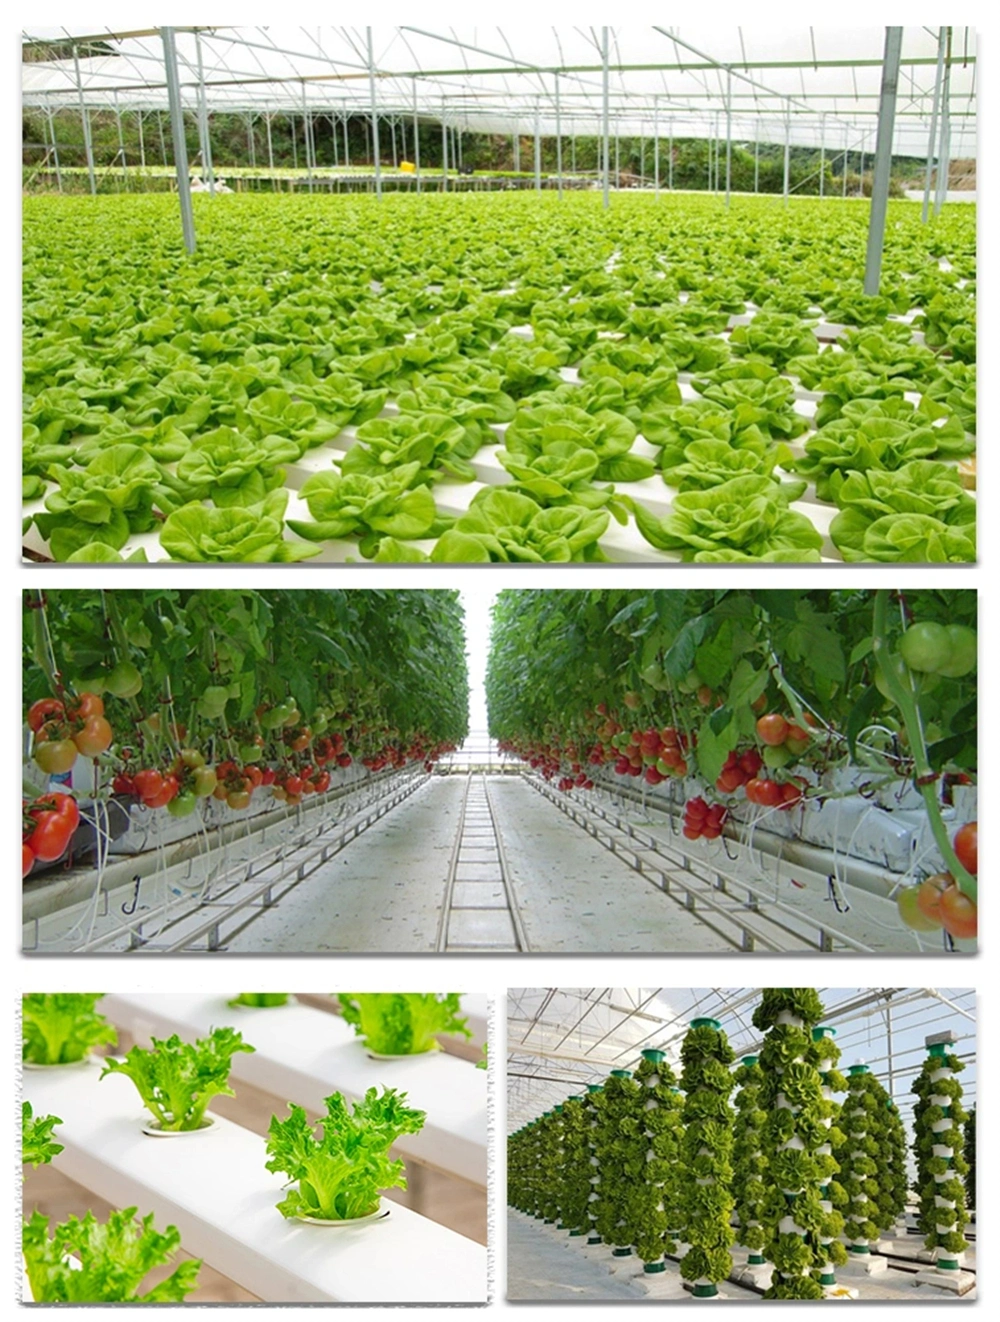 Cheap Plastic Film/Agriculture Grow Tents/Greenhouse for Garden/Tomatoes/Salad/Cucumber with Hydroponic System